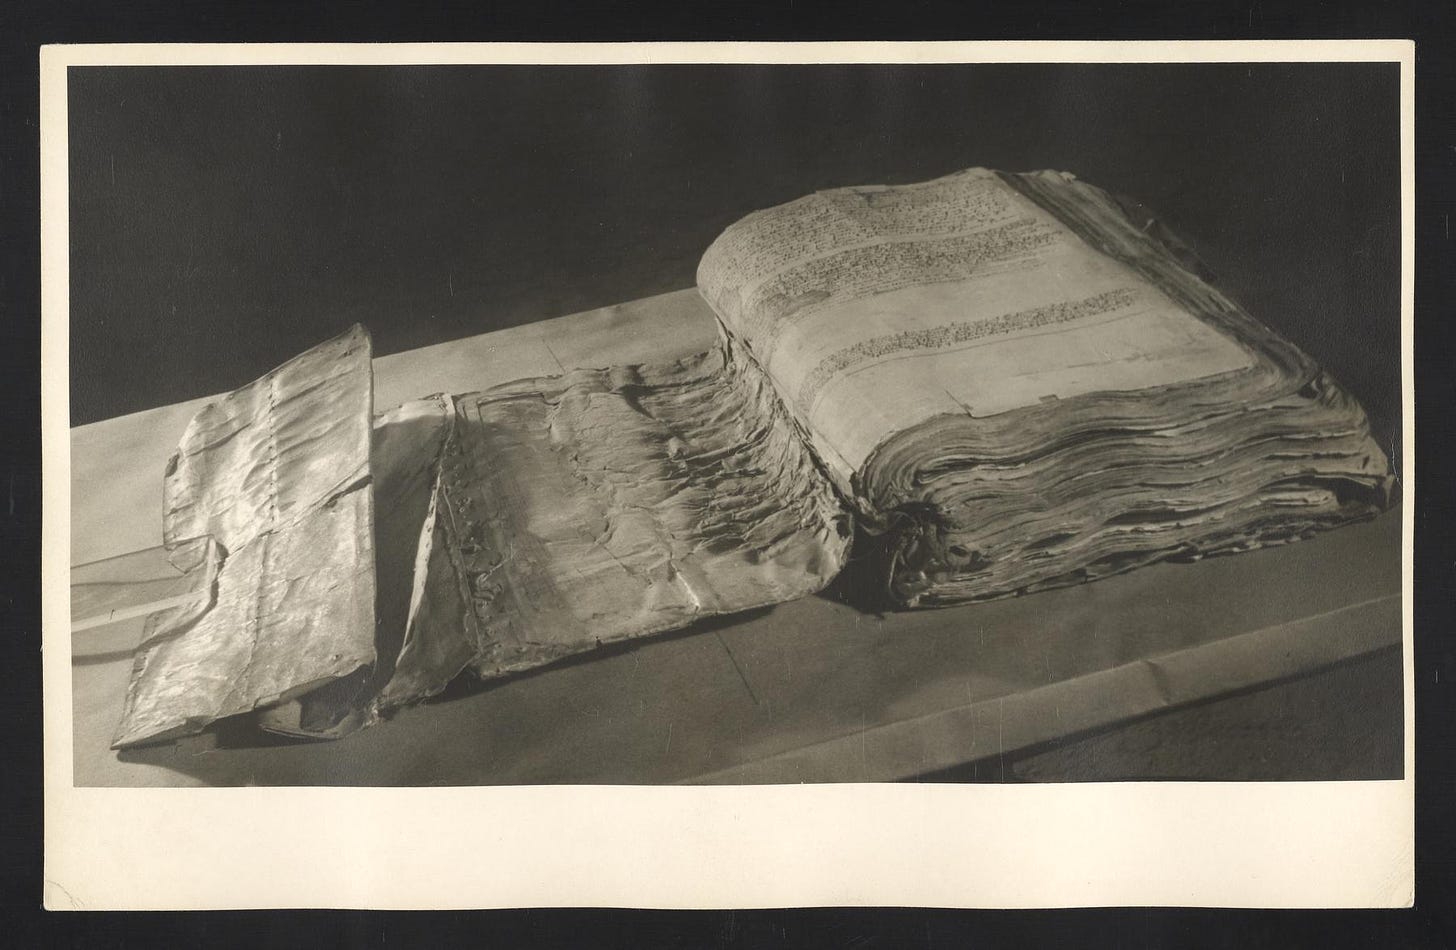 A black and white image of a huge old book with hundreds of mouldering pages opened to the first page.